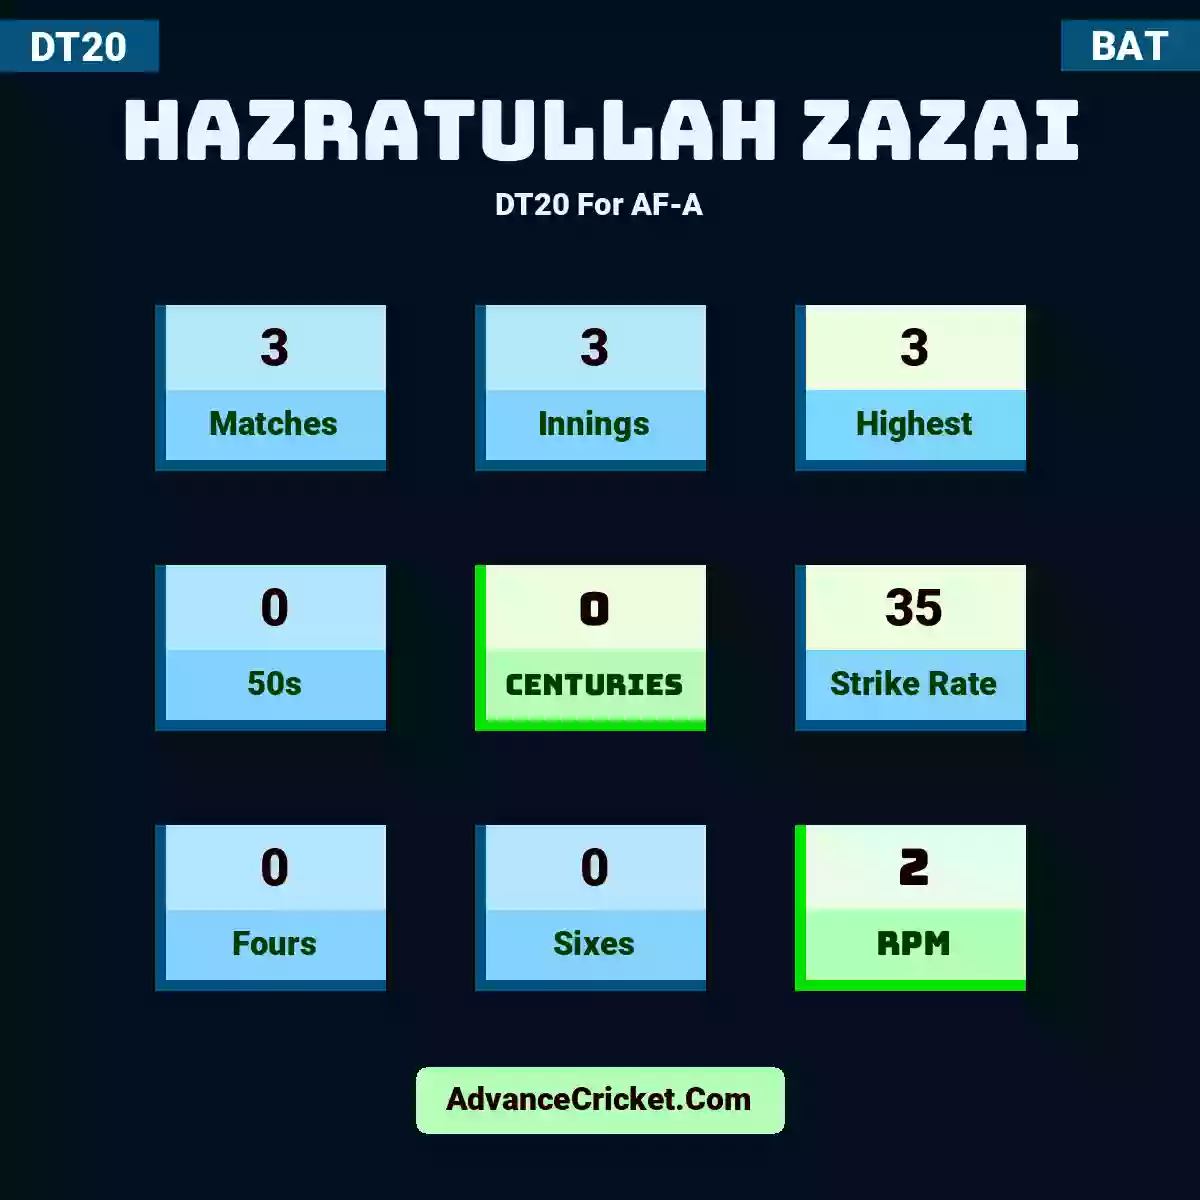 Hazratullah Zazai DT20  For AF-A, Hazratullah Zazai played 3 matches, scored 3 runs as highest, 0 half-centuries, and 0 centuries, with a strike rate of 35. H.Zazai hit 0 fours and 0 sixes, with an RPM of 2.